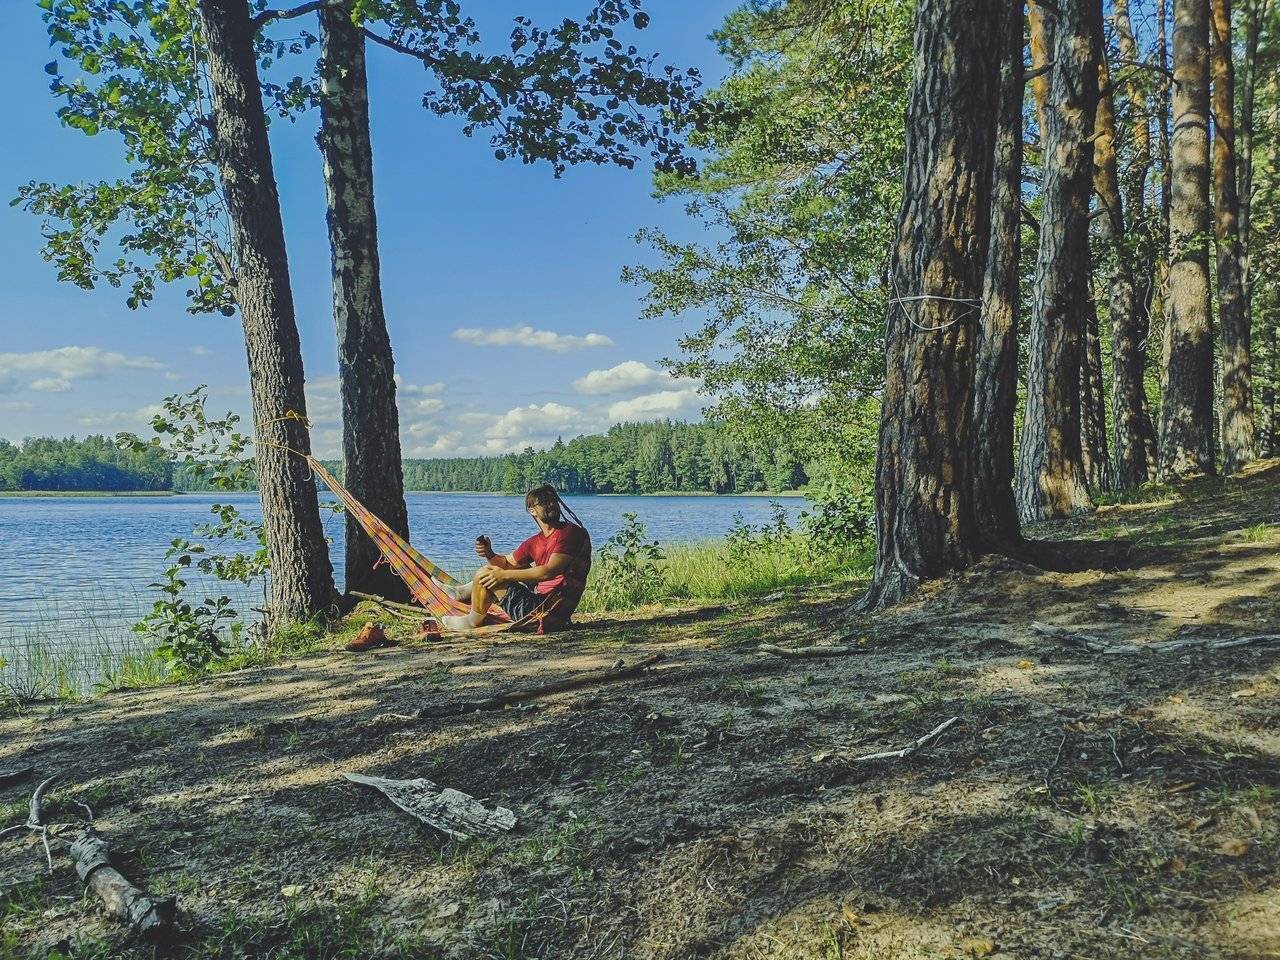   Setting up a camp near Black Lakajai lake in Labanoras Regional Park, Lithuania. Photo Alis Monte [CC BY-SA 4.0], via Connecting the Dots